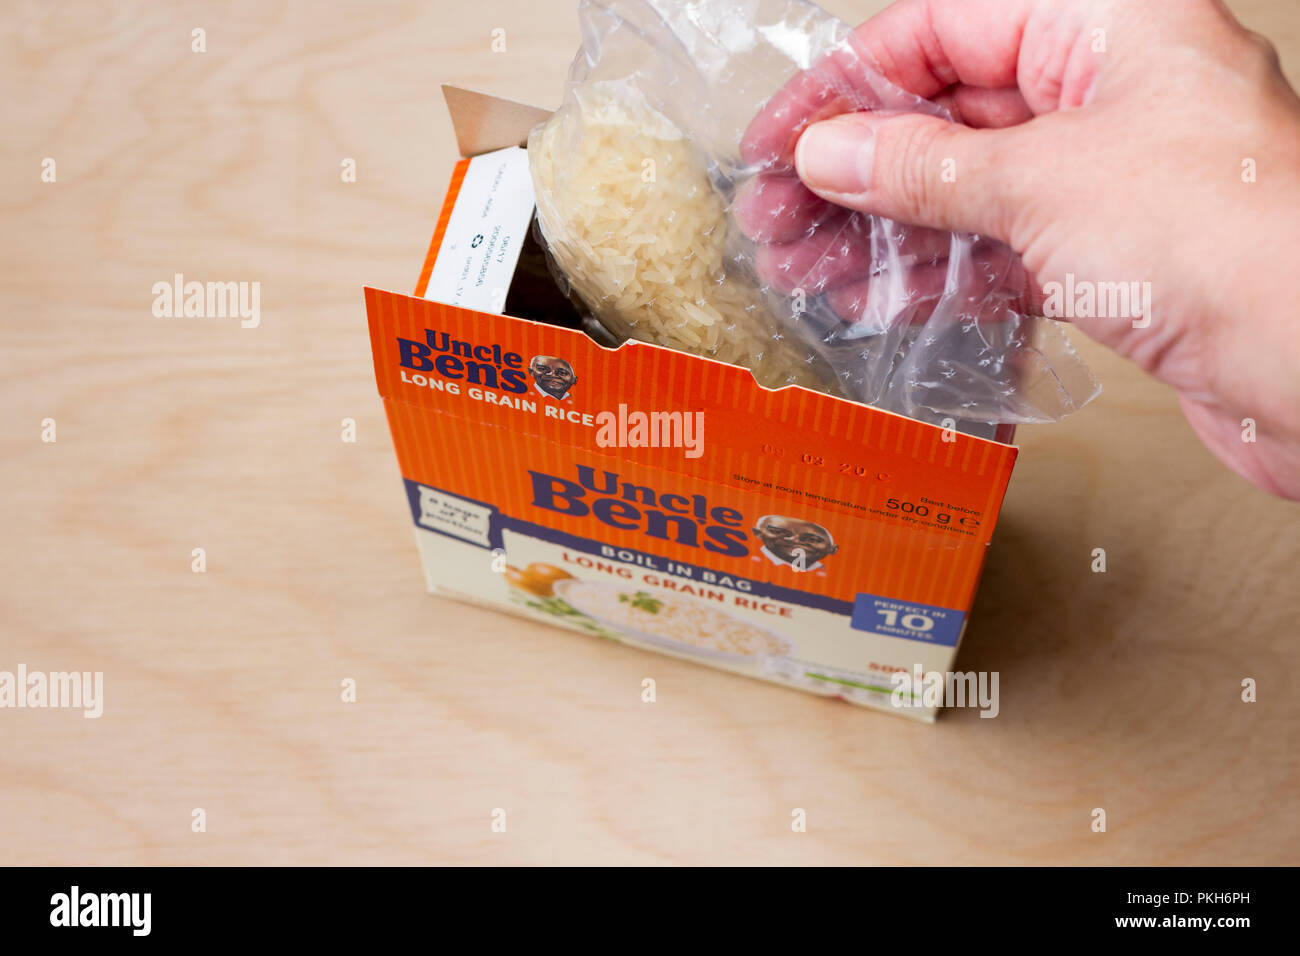 Female hand holding a bag of Uncle Ben's boil in the bag rice, United Kingdom Stock Photo